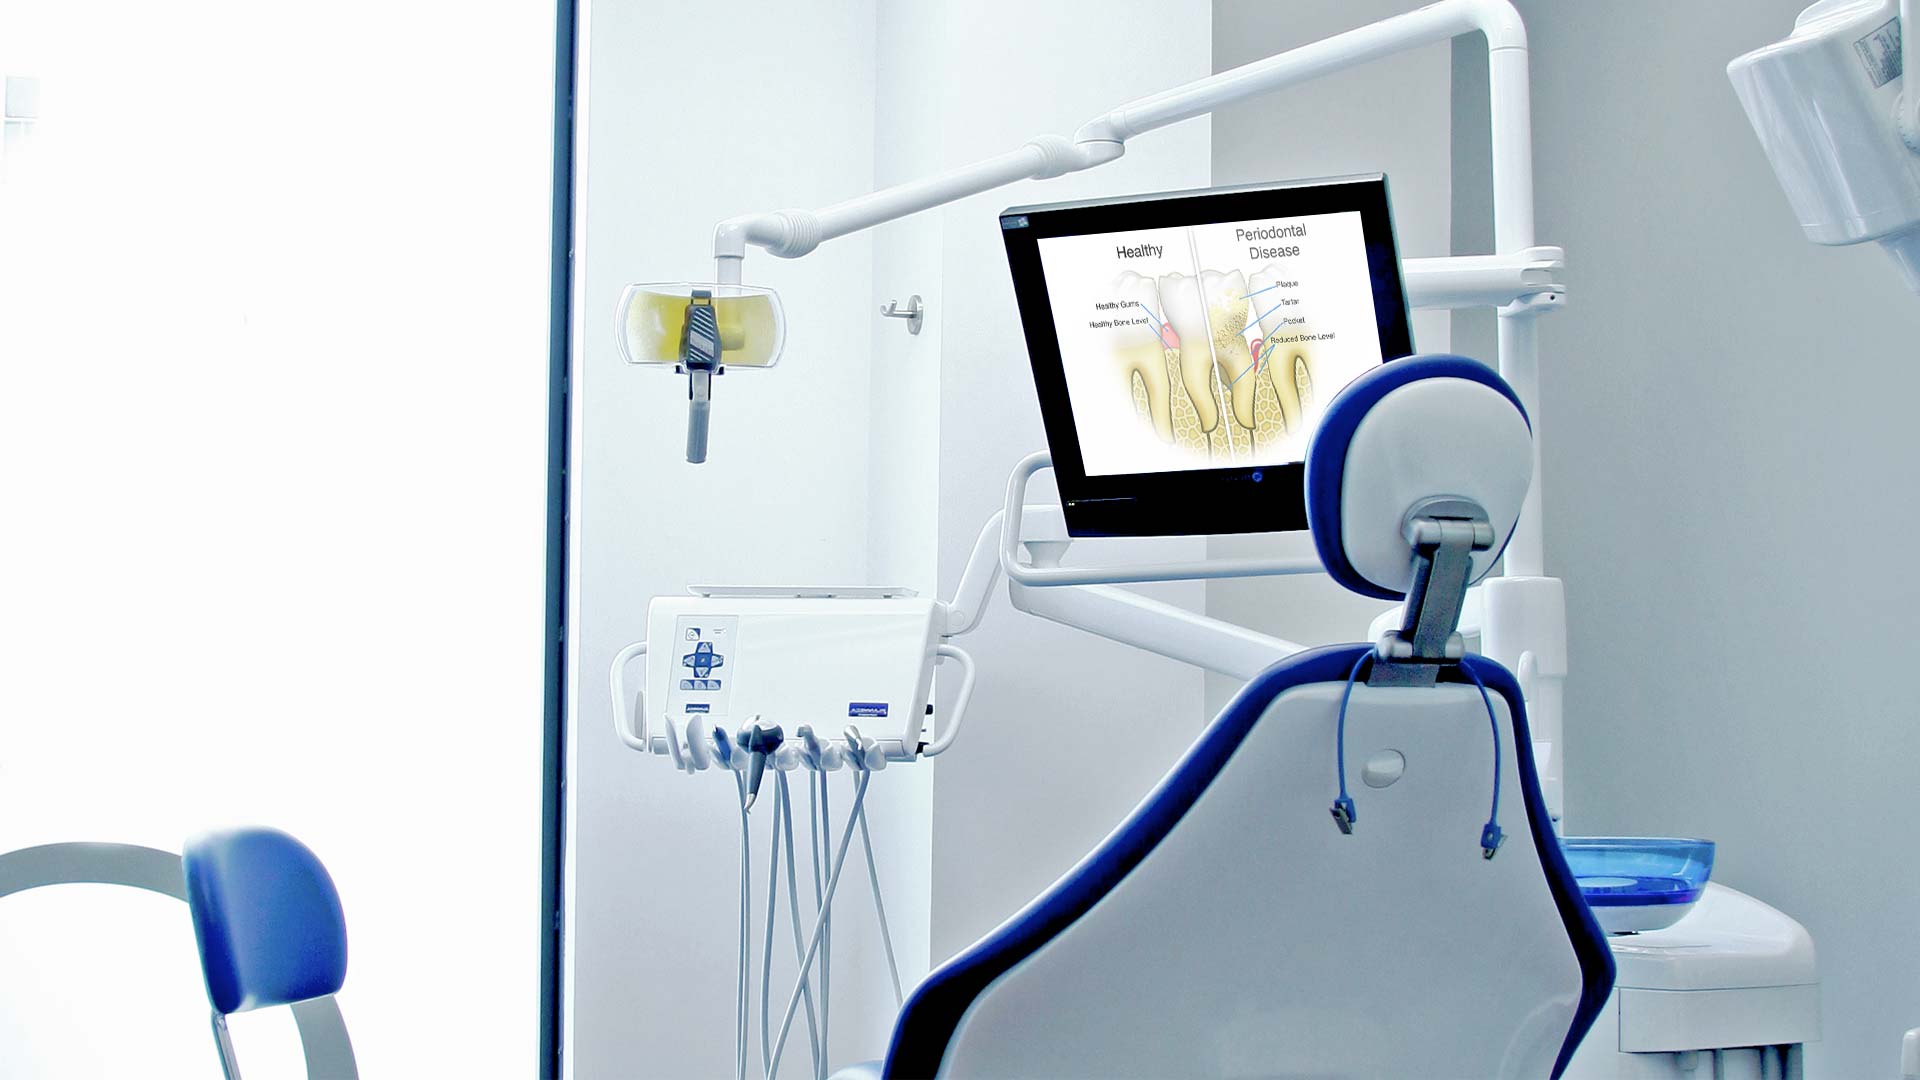 An image of a treatment room at Clinica Cloe with a screen explaining the differences between healthy teeth and periodontal disease